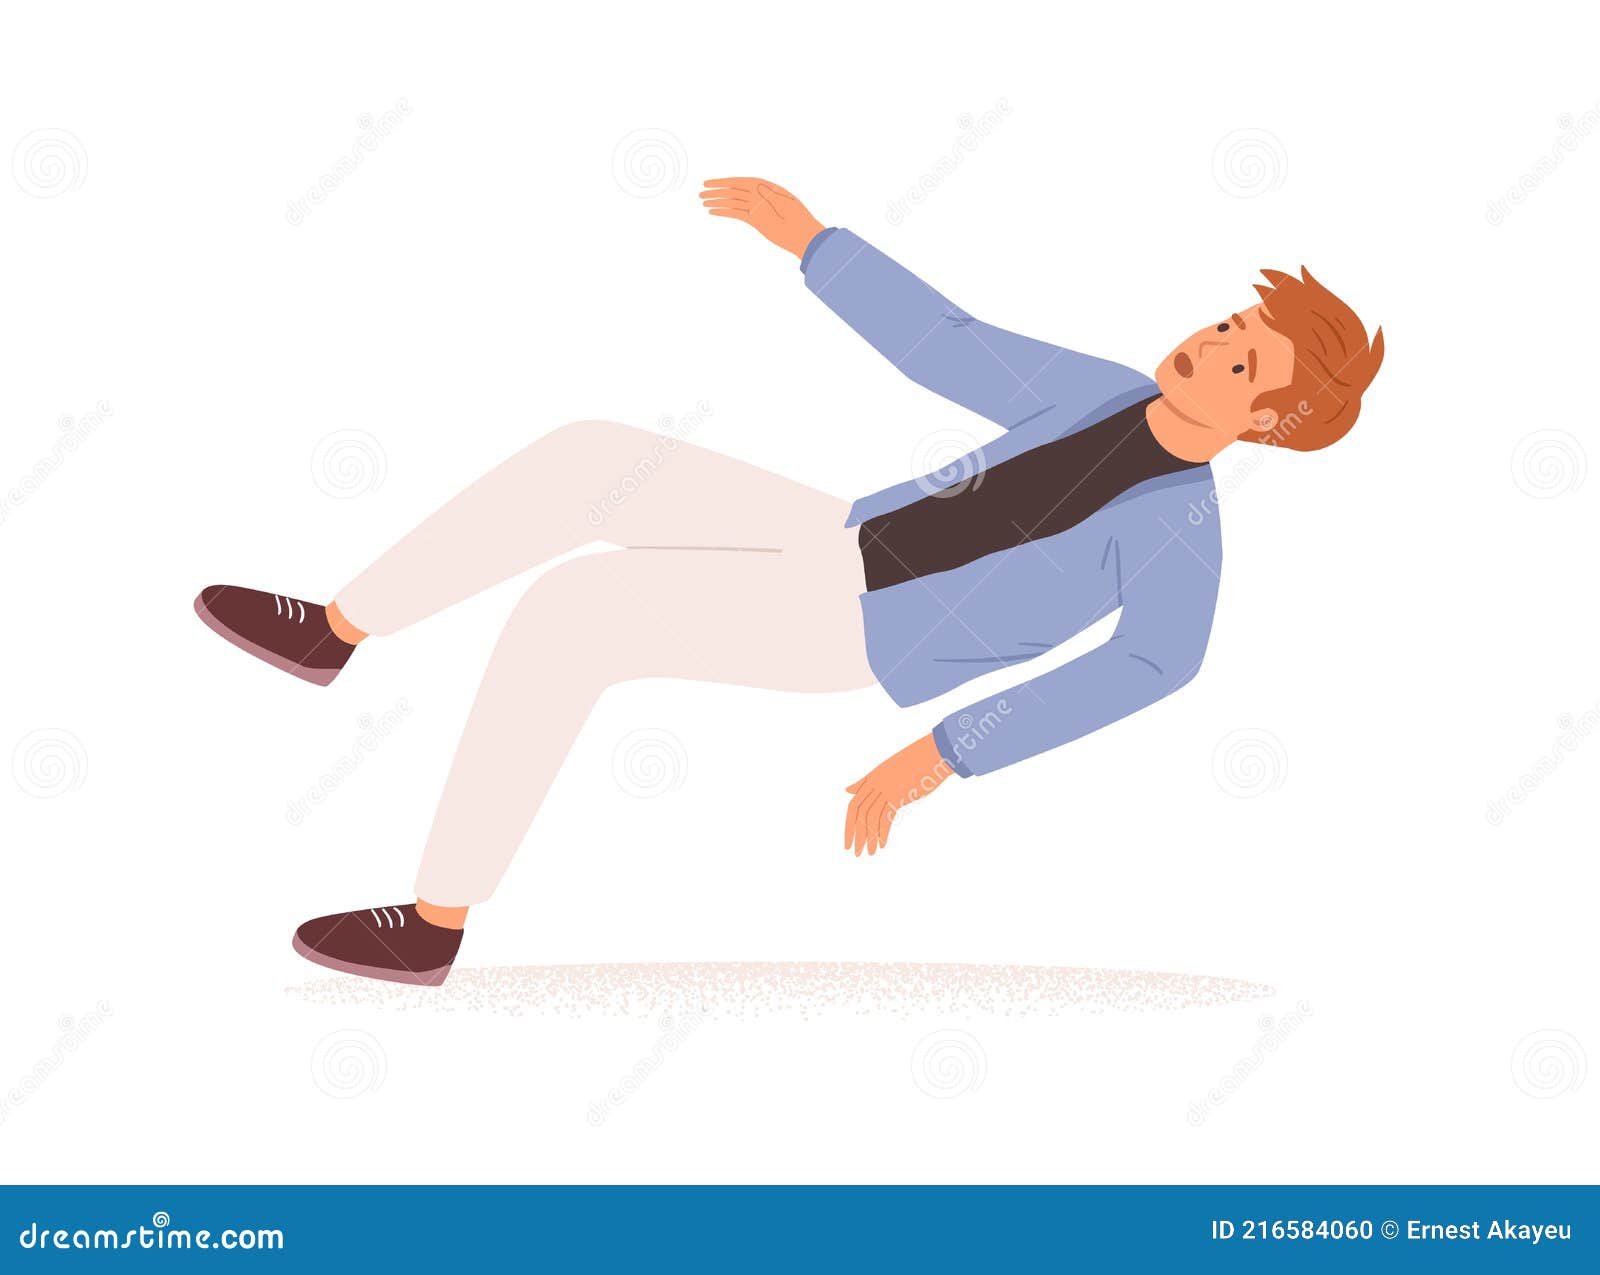 Person Falling Down. Fall or Failure of Young Man Isolated on White  Background Stock Vector - Illustration of employee, fail: 216584060